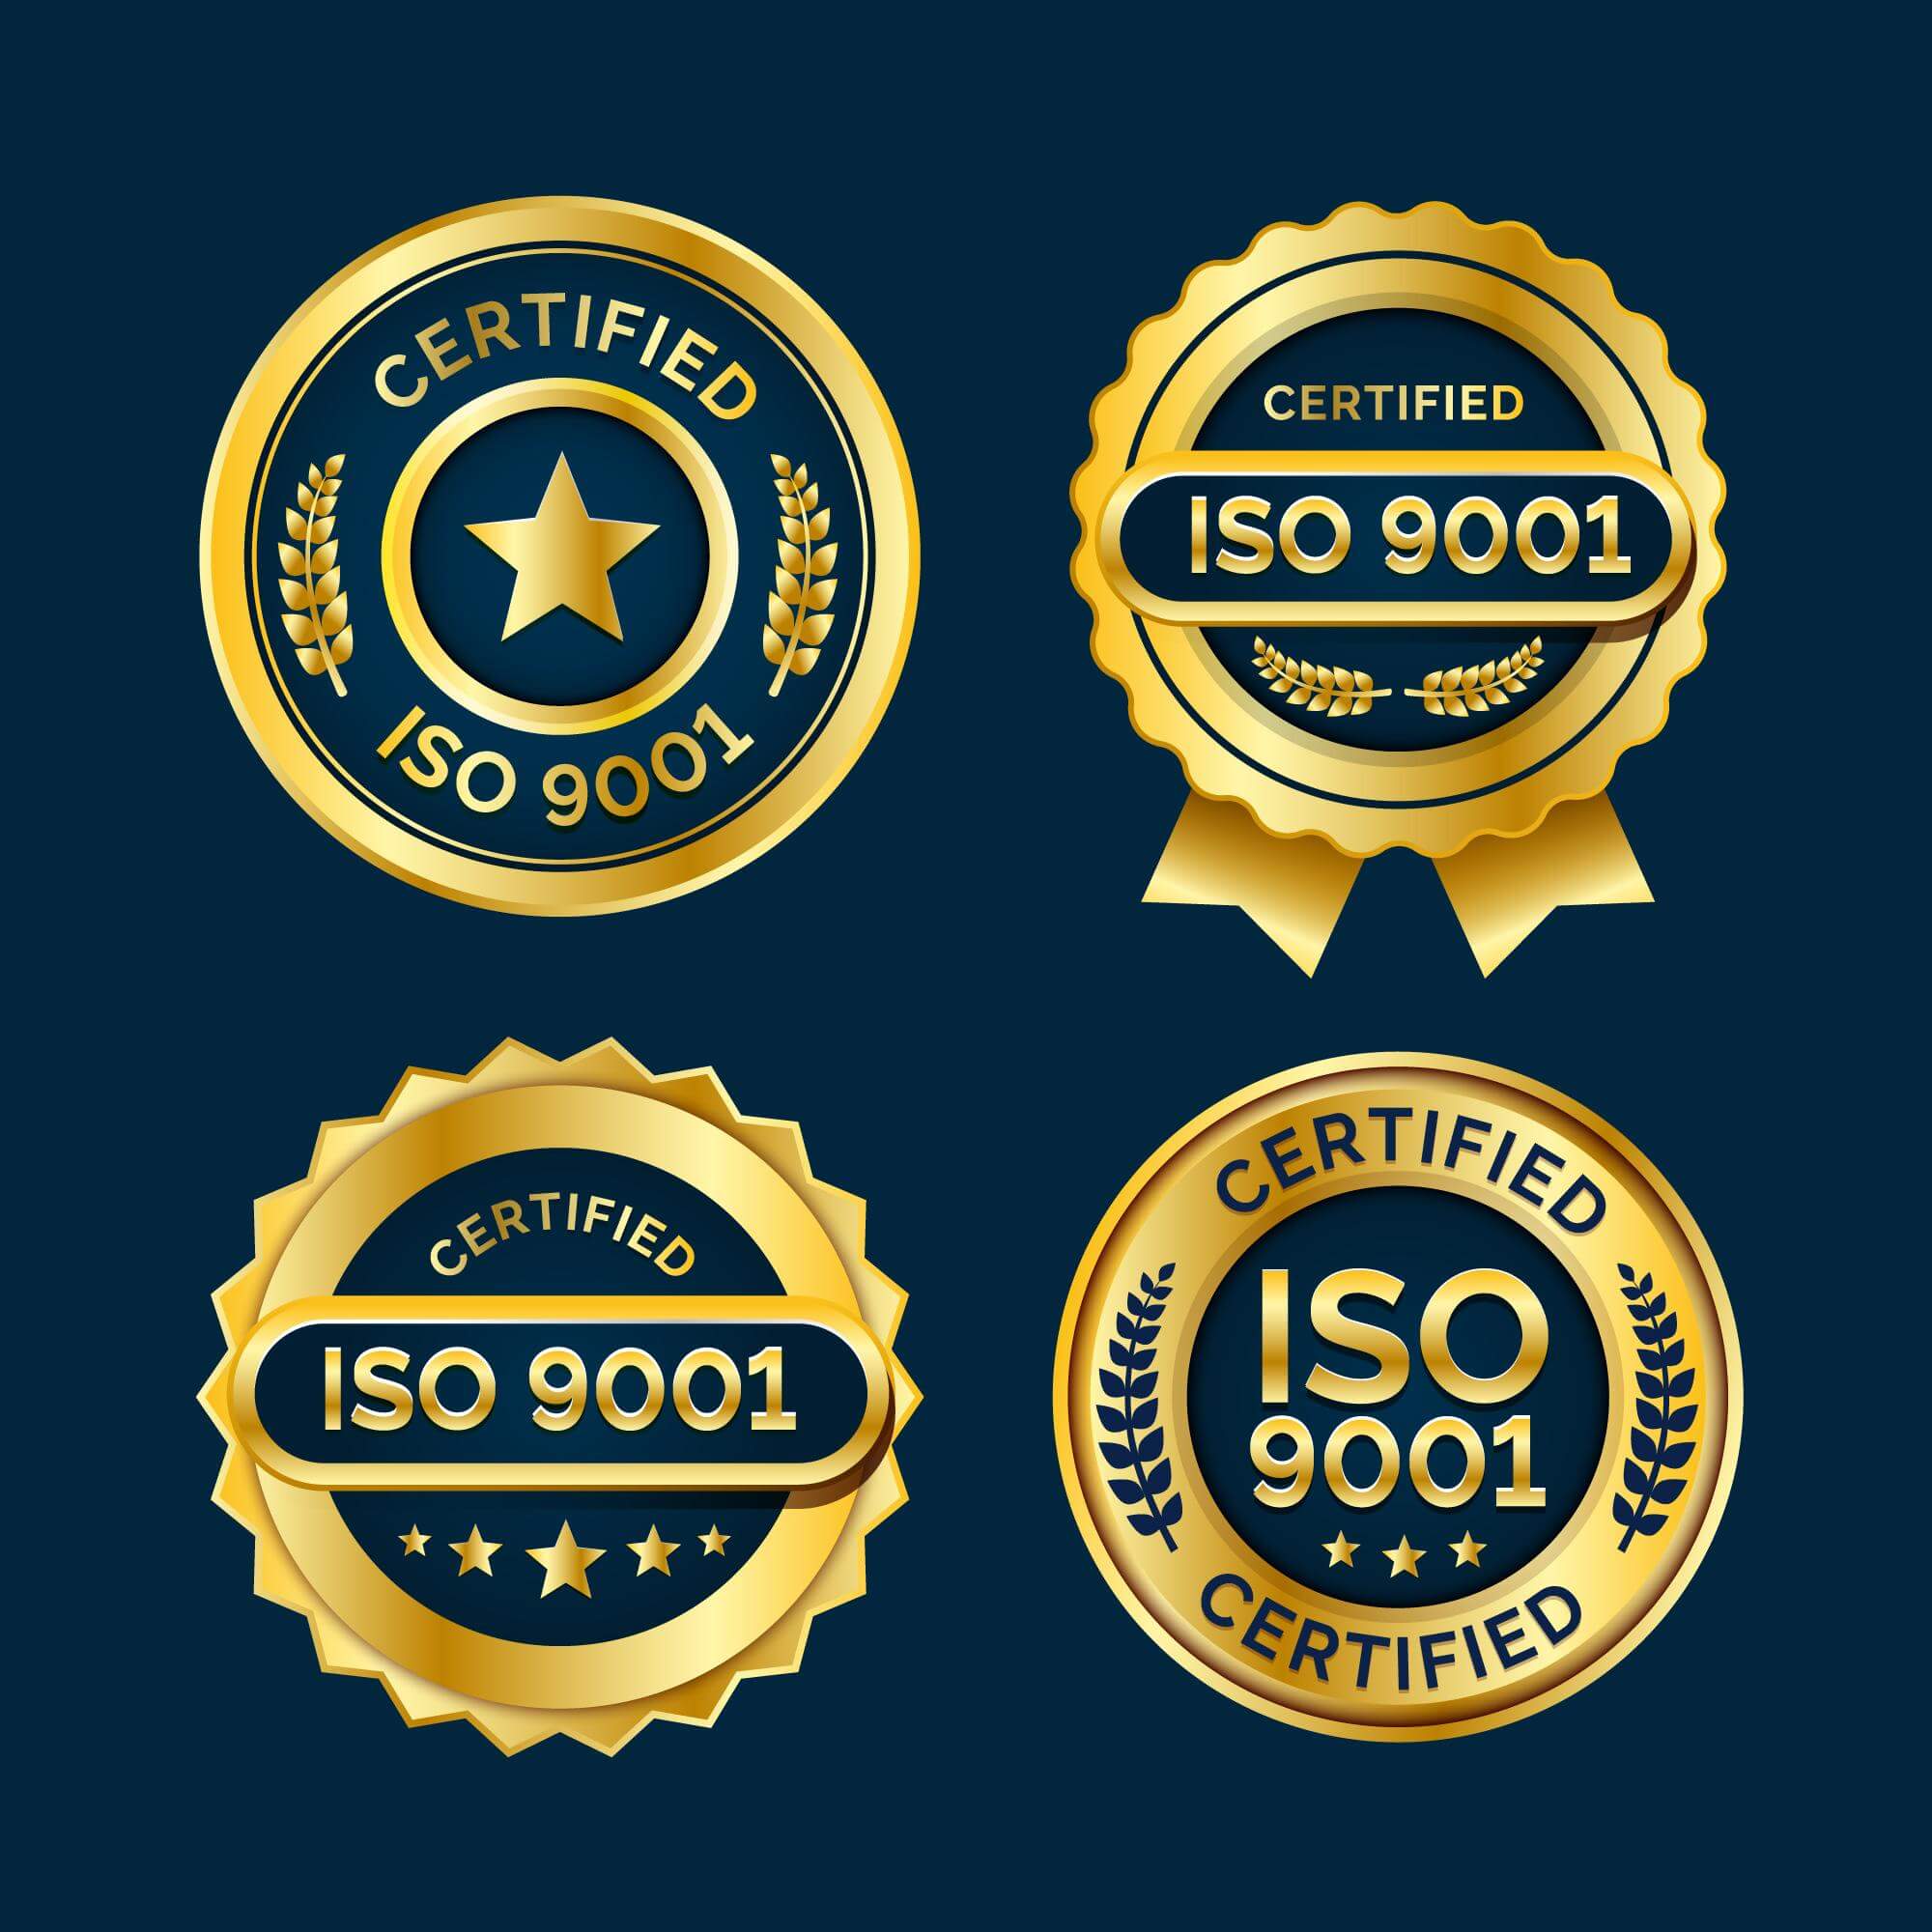 ISO 9001 Certification - MG Environmental Consulting